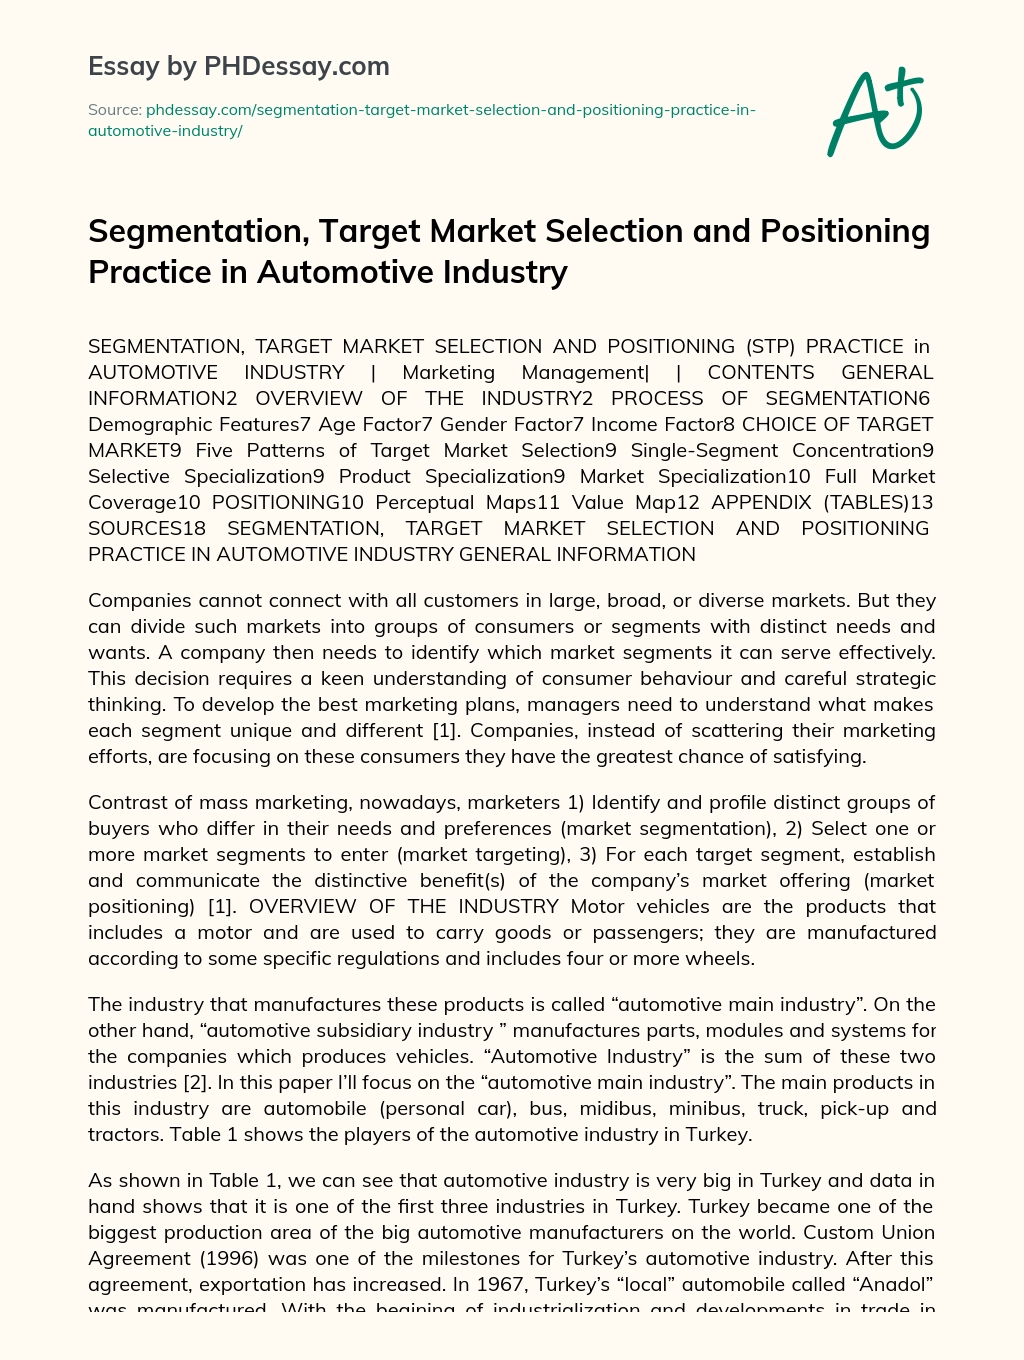 Segmentation, Target Market Selection and Positioning Practice in Automotive Industry essay